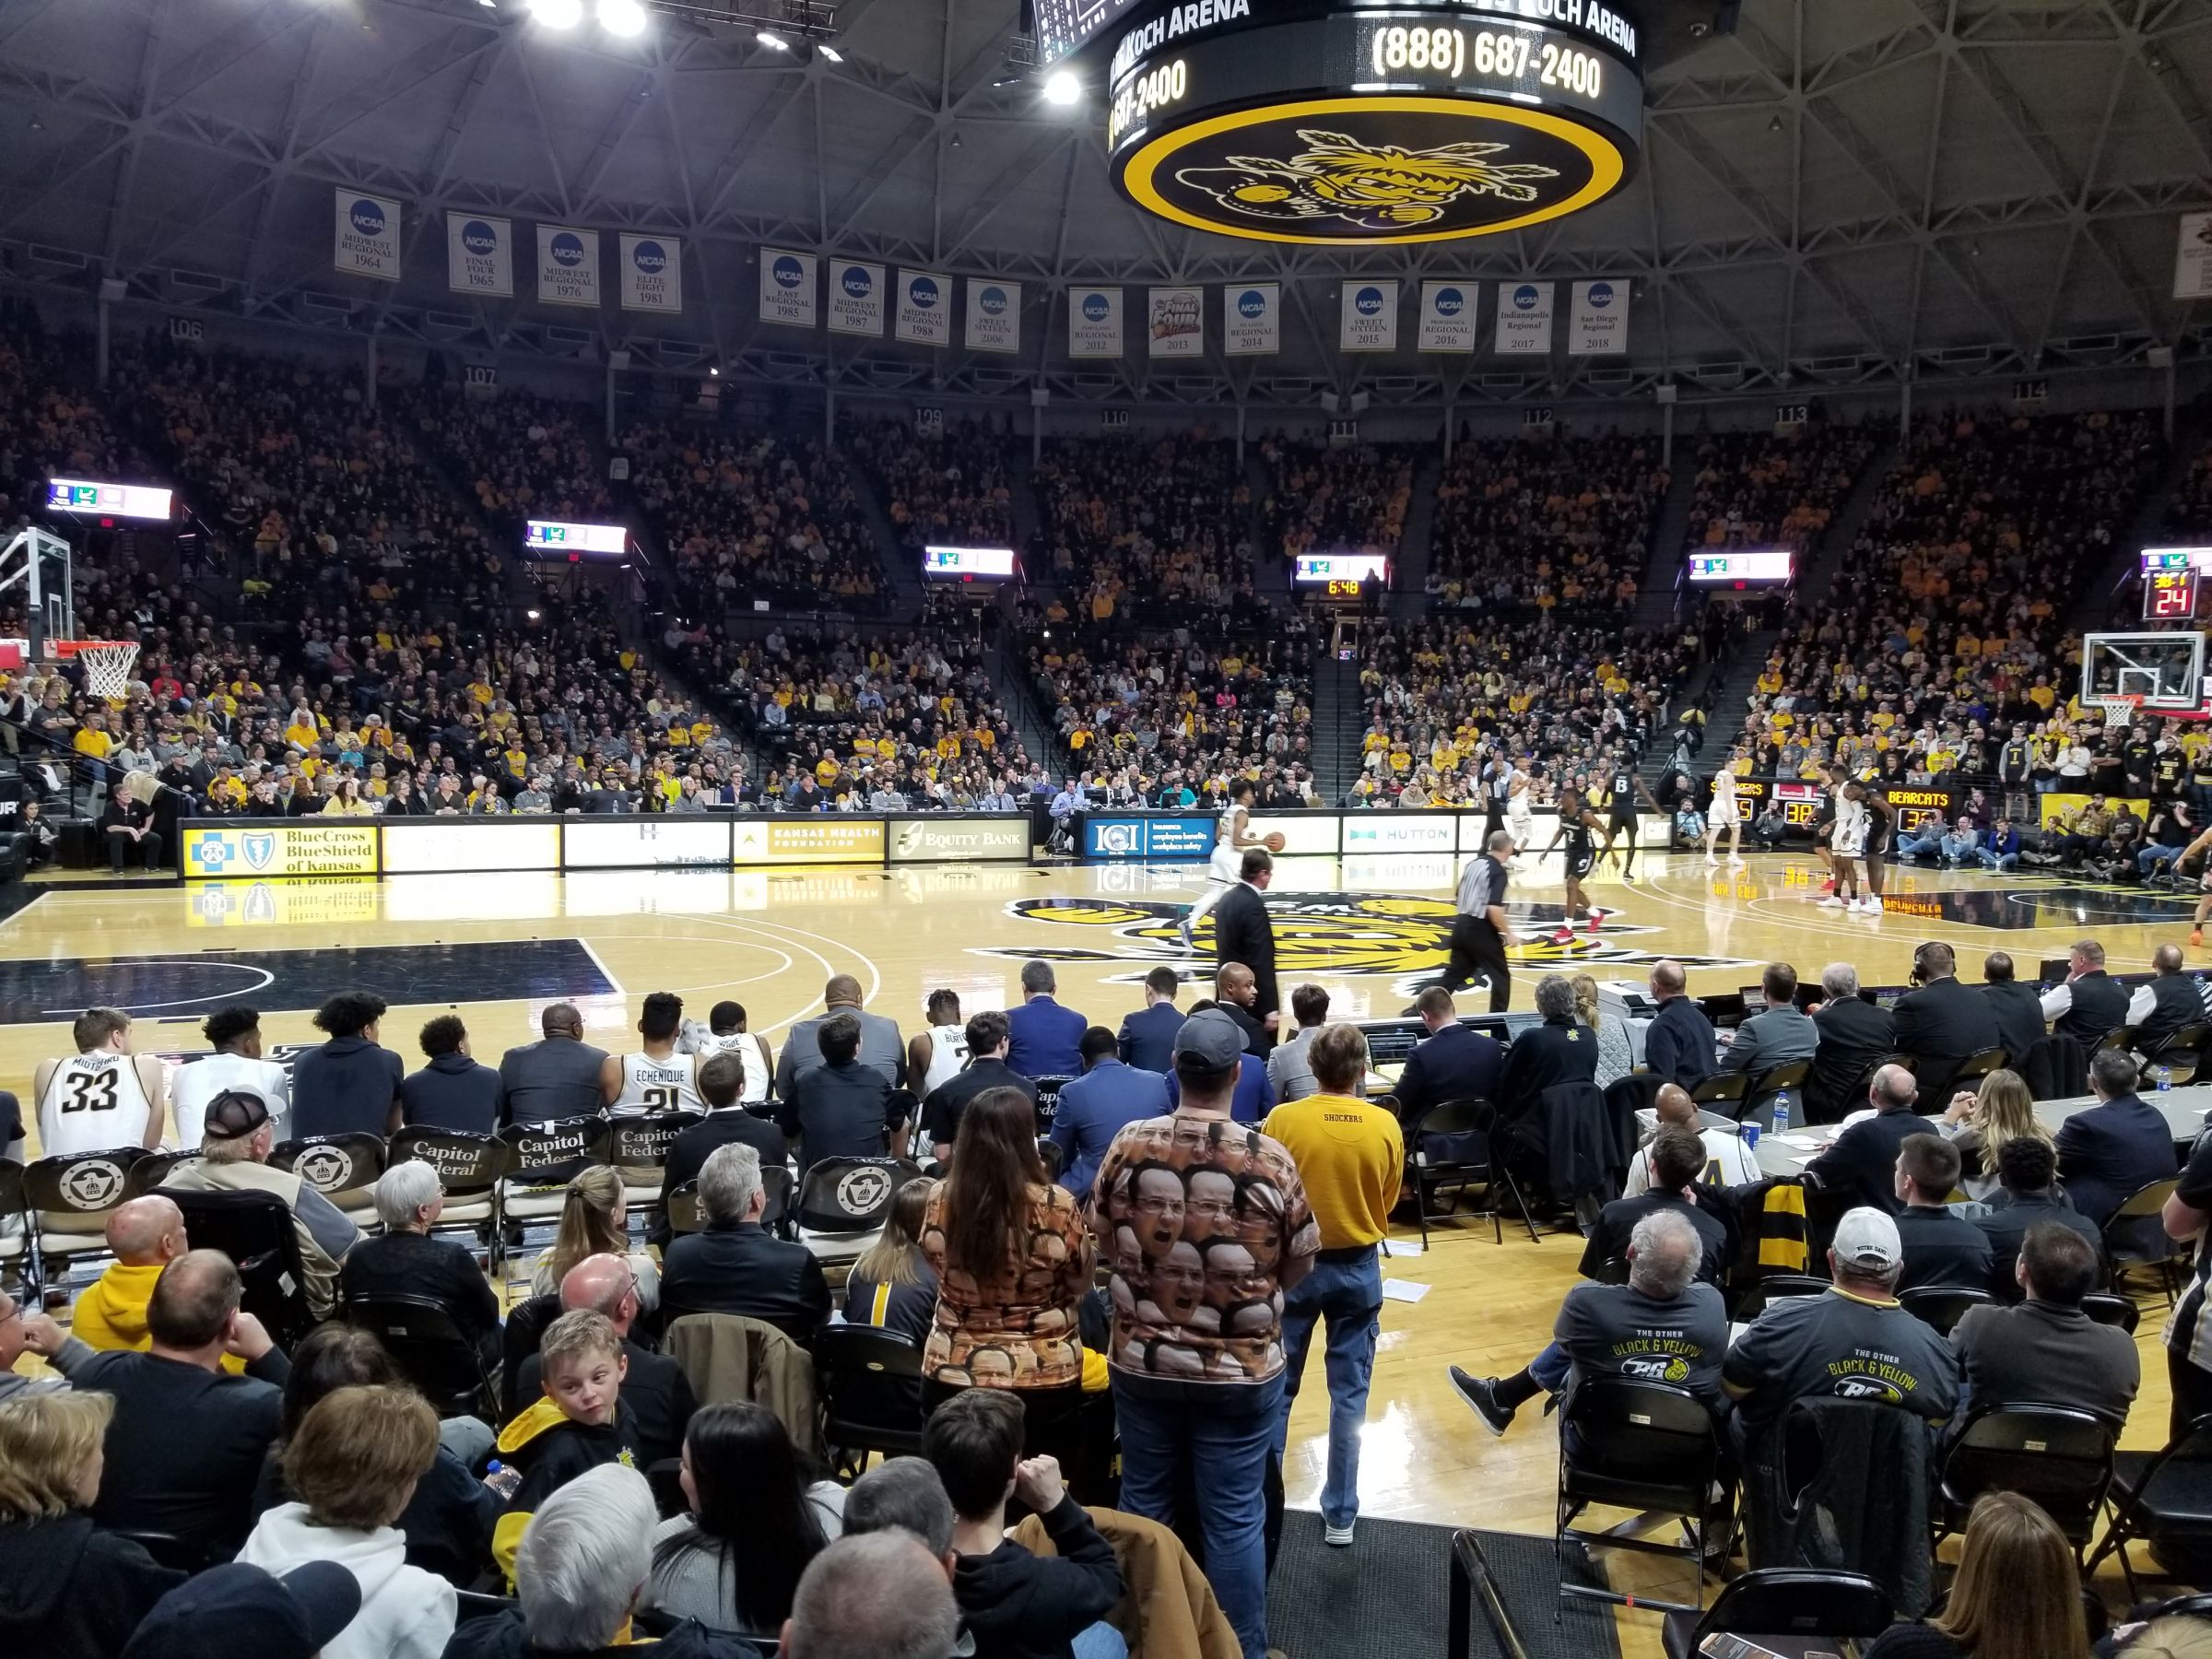 section 123, row 6 seat view  - charles koch arena